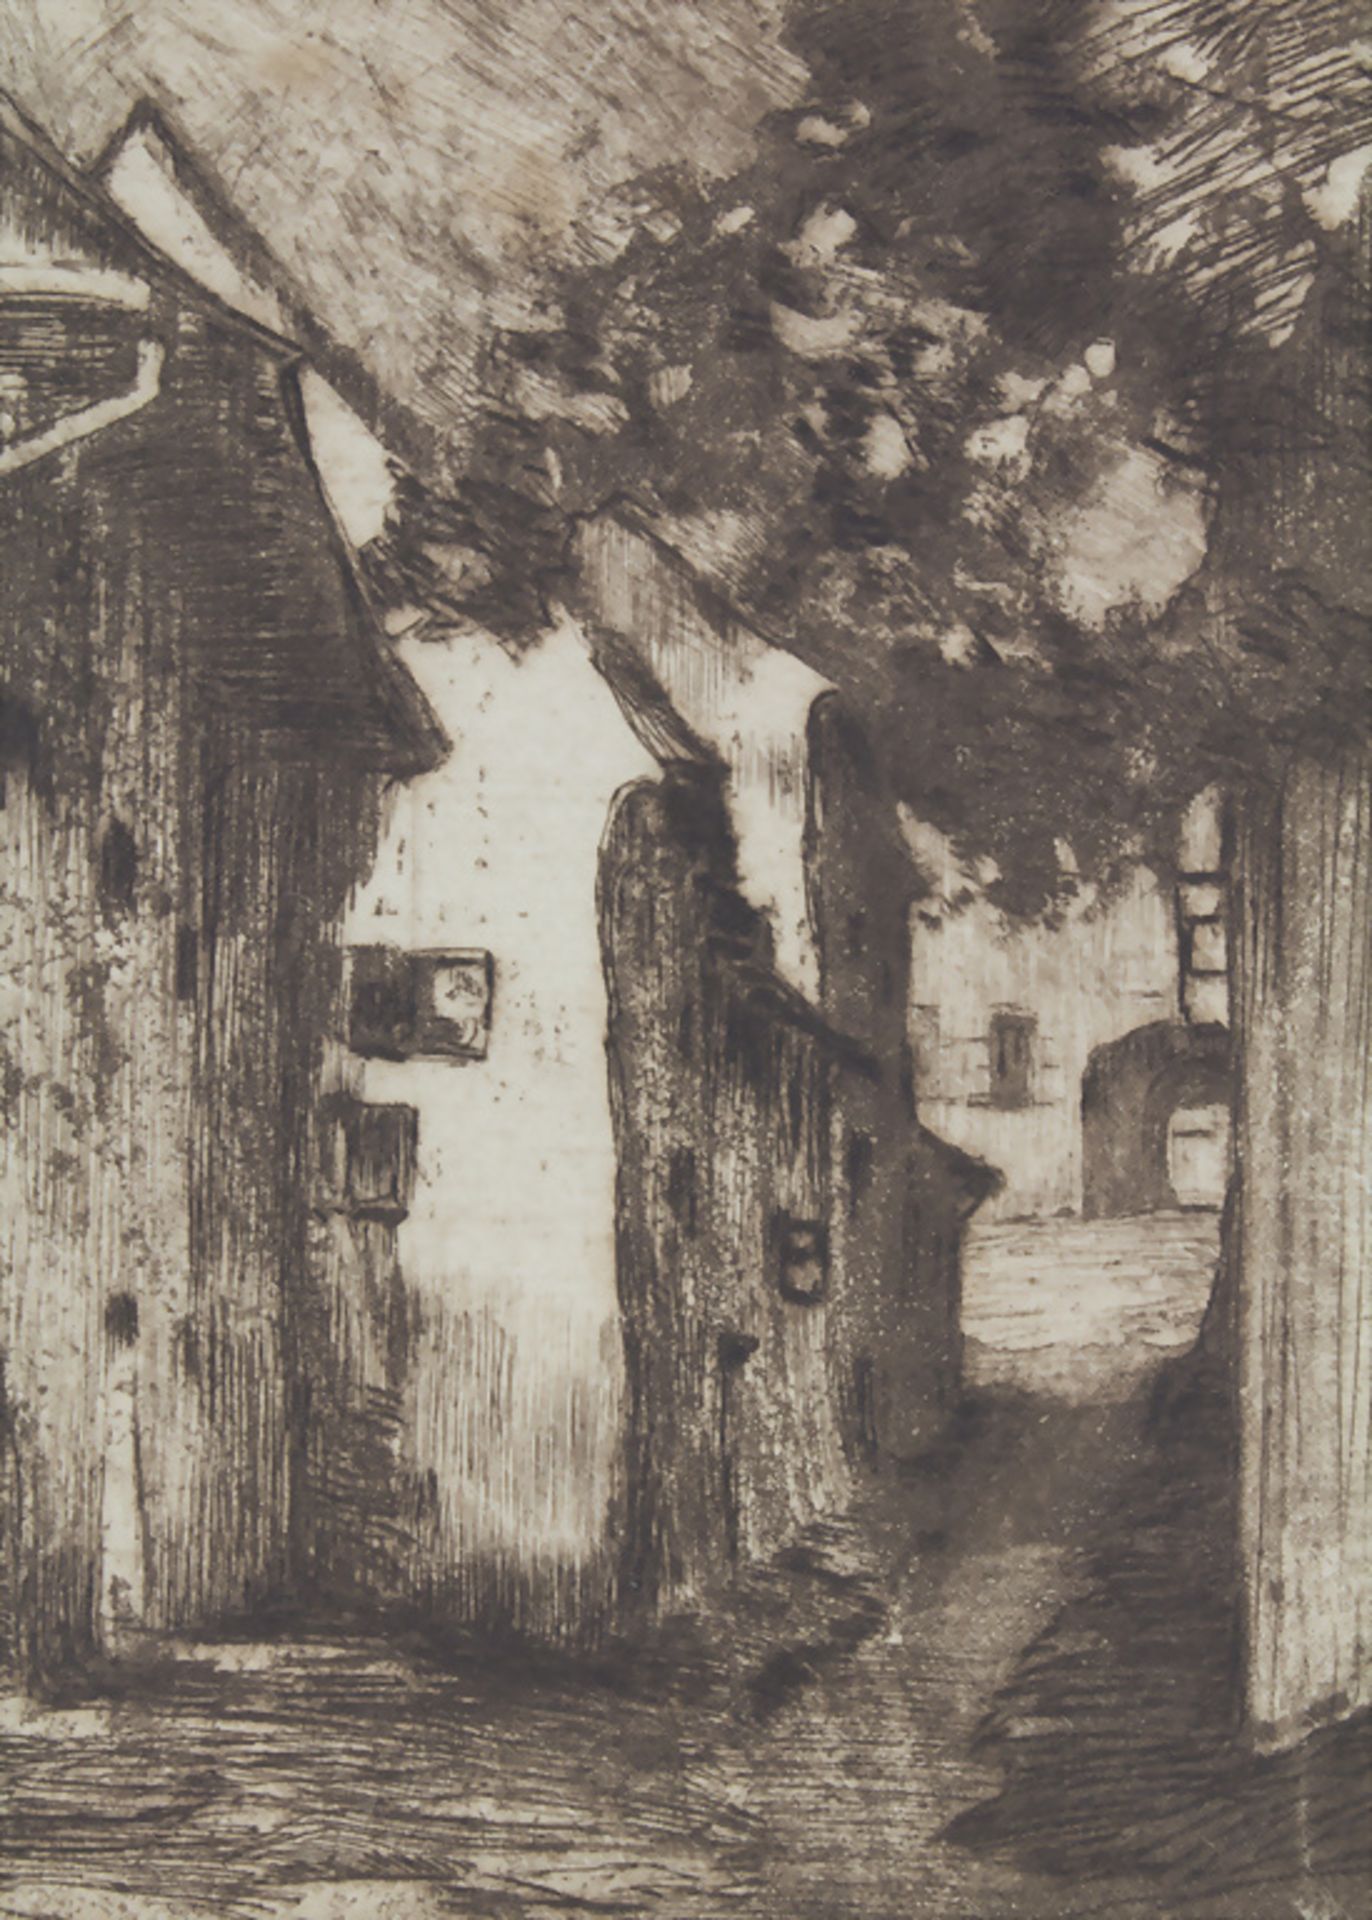 Richard Canisius (1872-1934), 'Gasse' / 'An alley' - Image 3 of 5